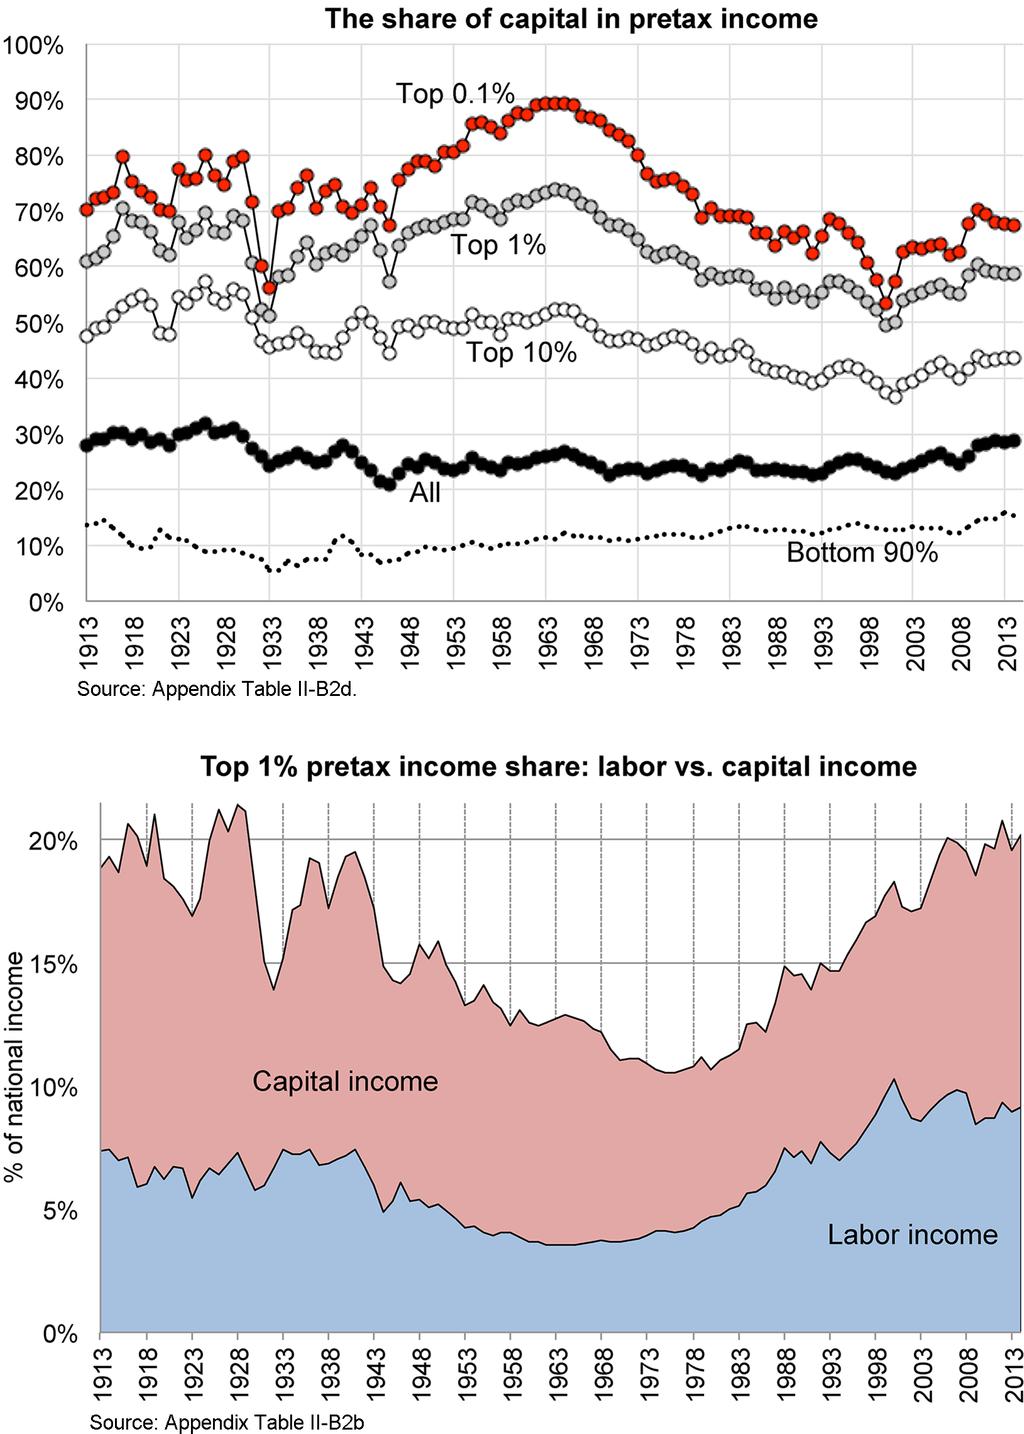 596 QUARTERLY JOURNAL OF ECONOMICS FIGURE VIII The Capital Share across the Distribution The top panel depicts the share of capital income in the pretax national income of various income groups: full